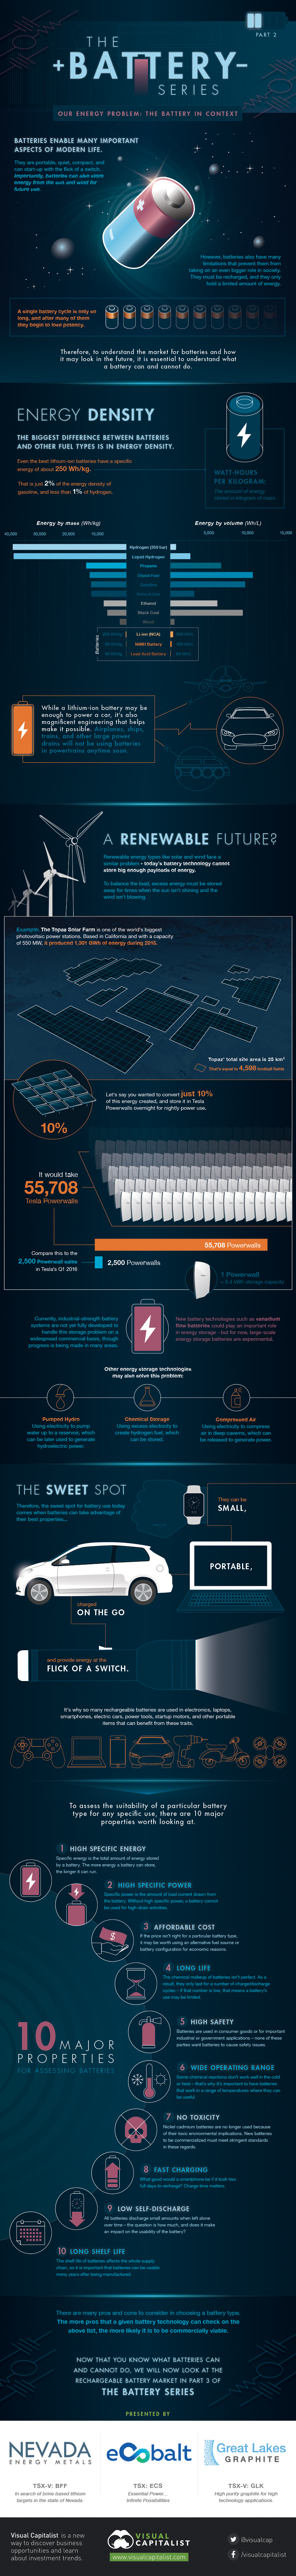 The Battery Series: Our Energy Problem: Putting the Battery in Context